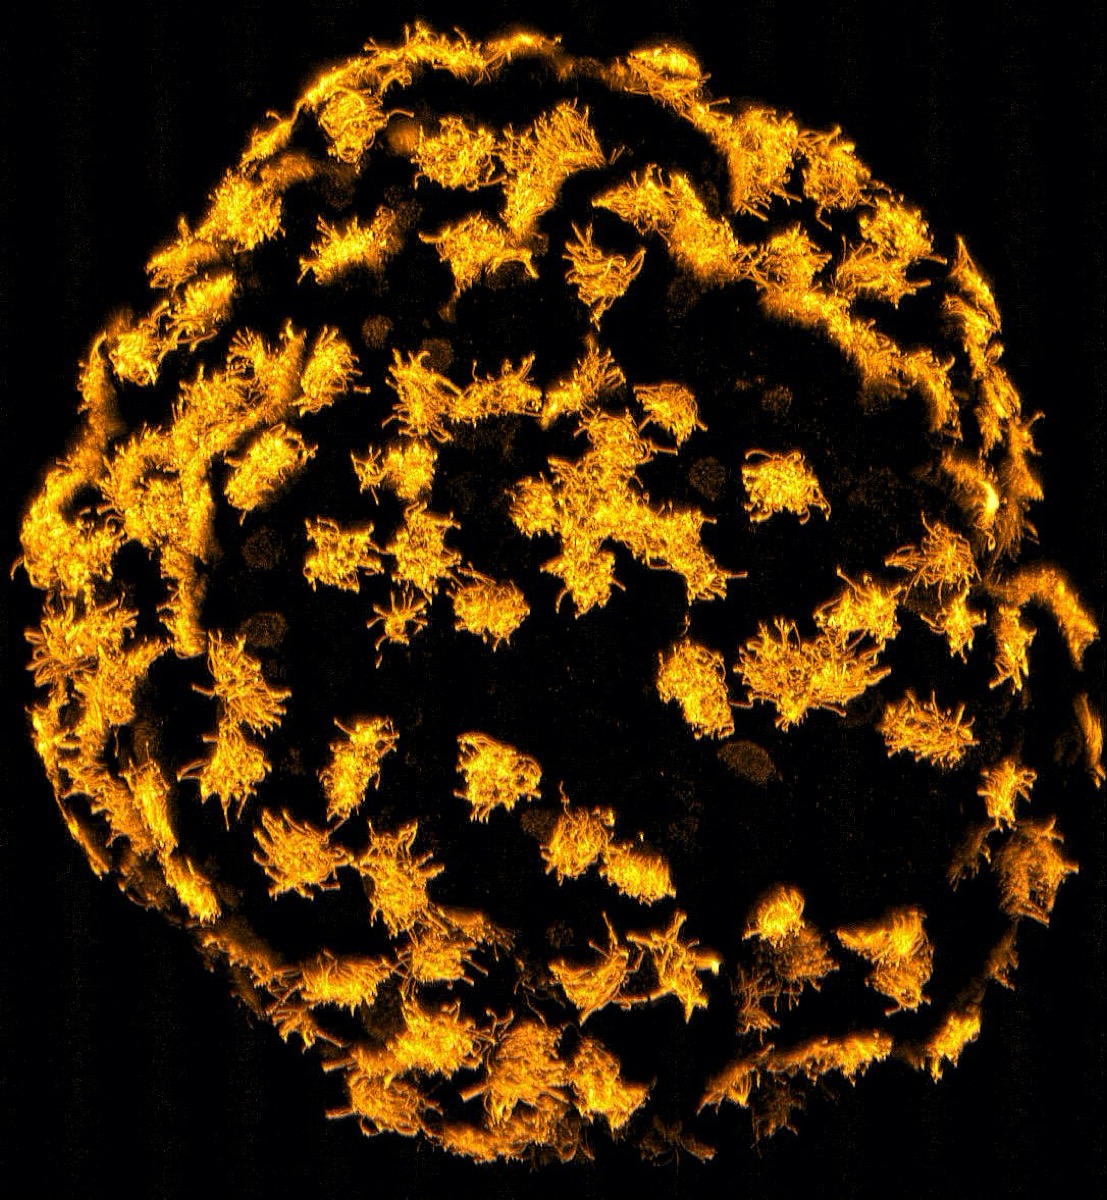 yellow cells with filamentous projections all arranged in a spherical pattern